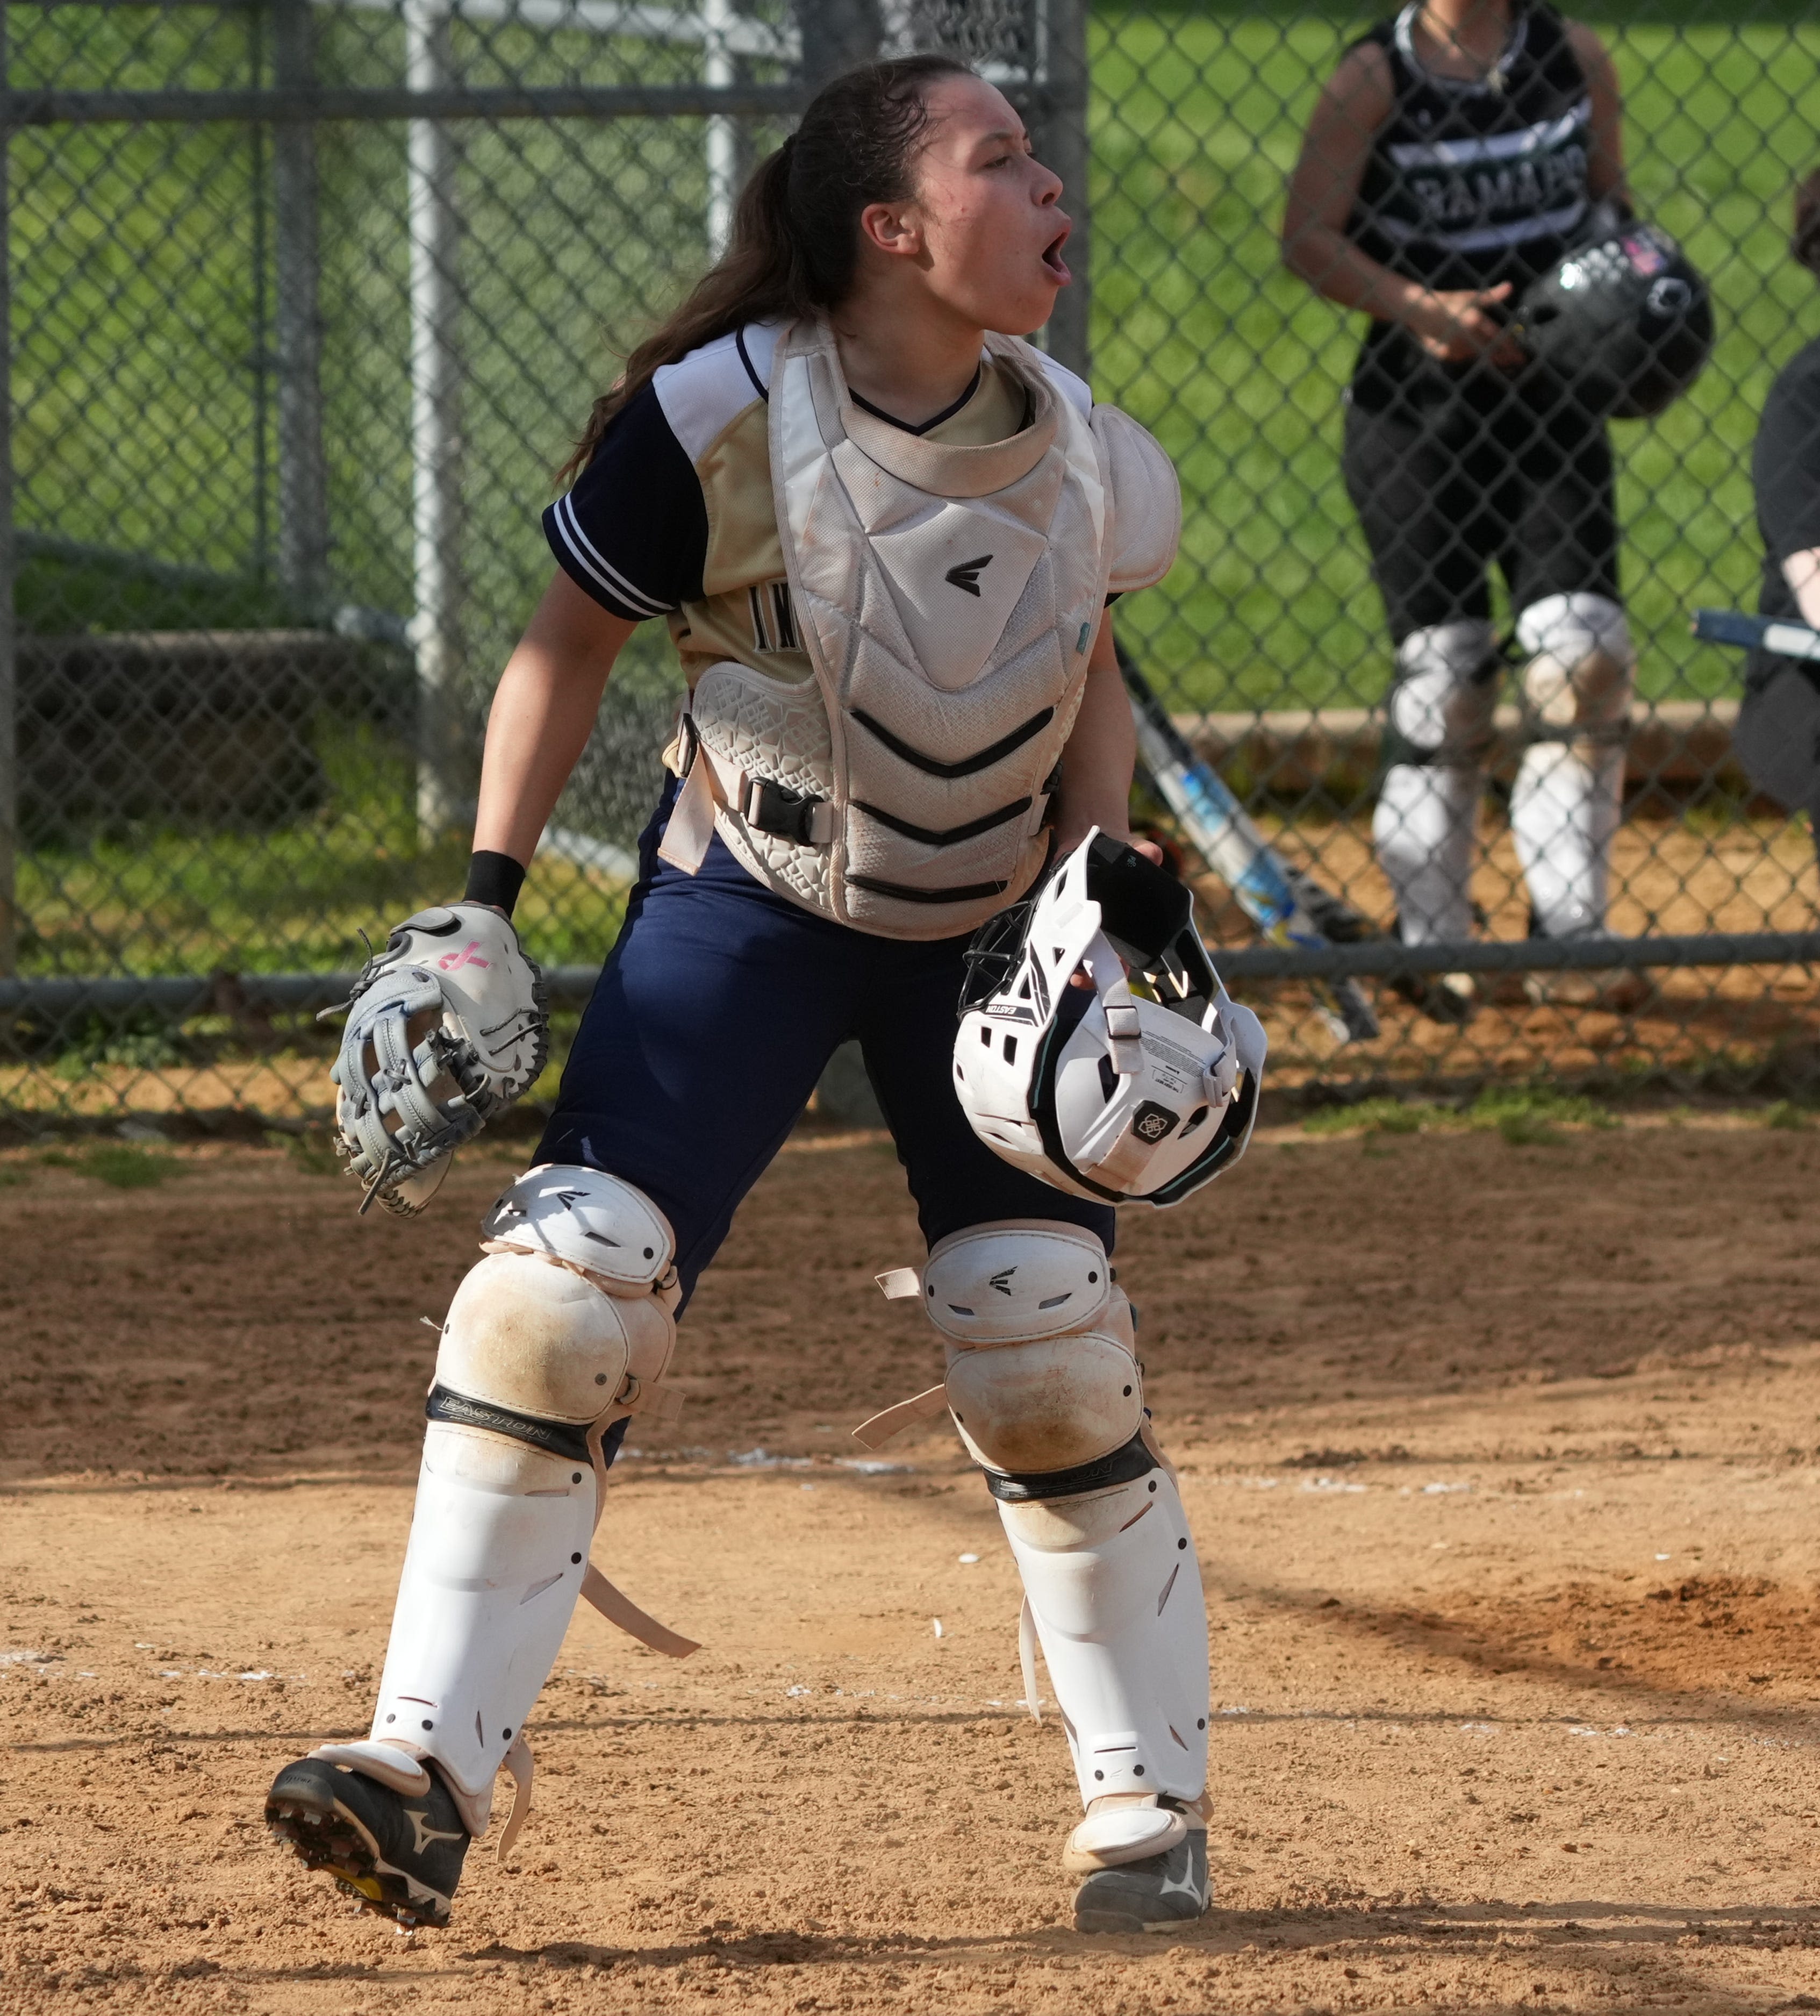 North Jersey softball star back in the game after an injury derailed her Olympic dream